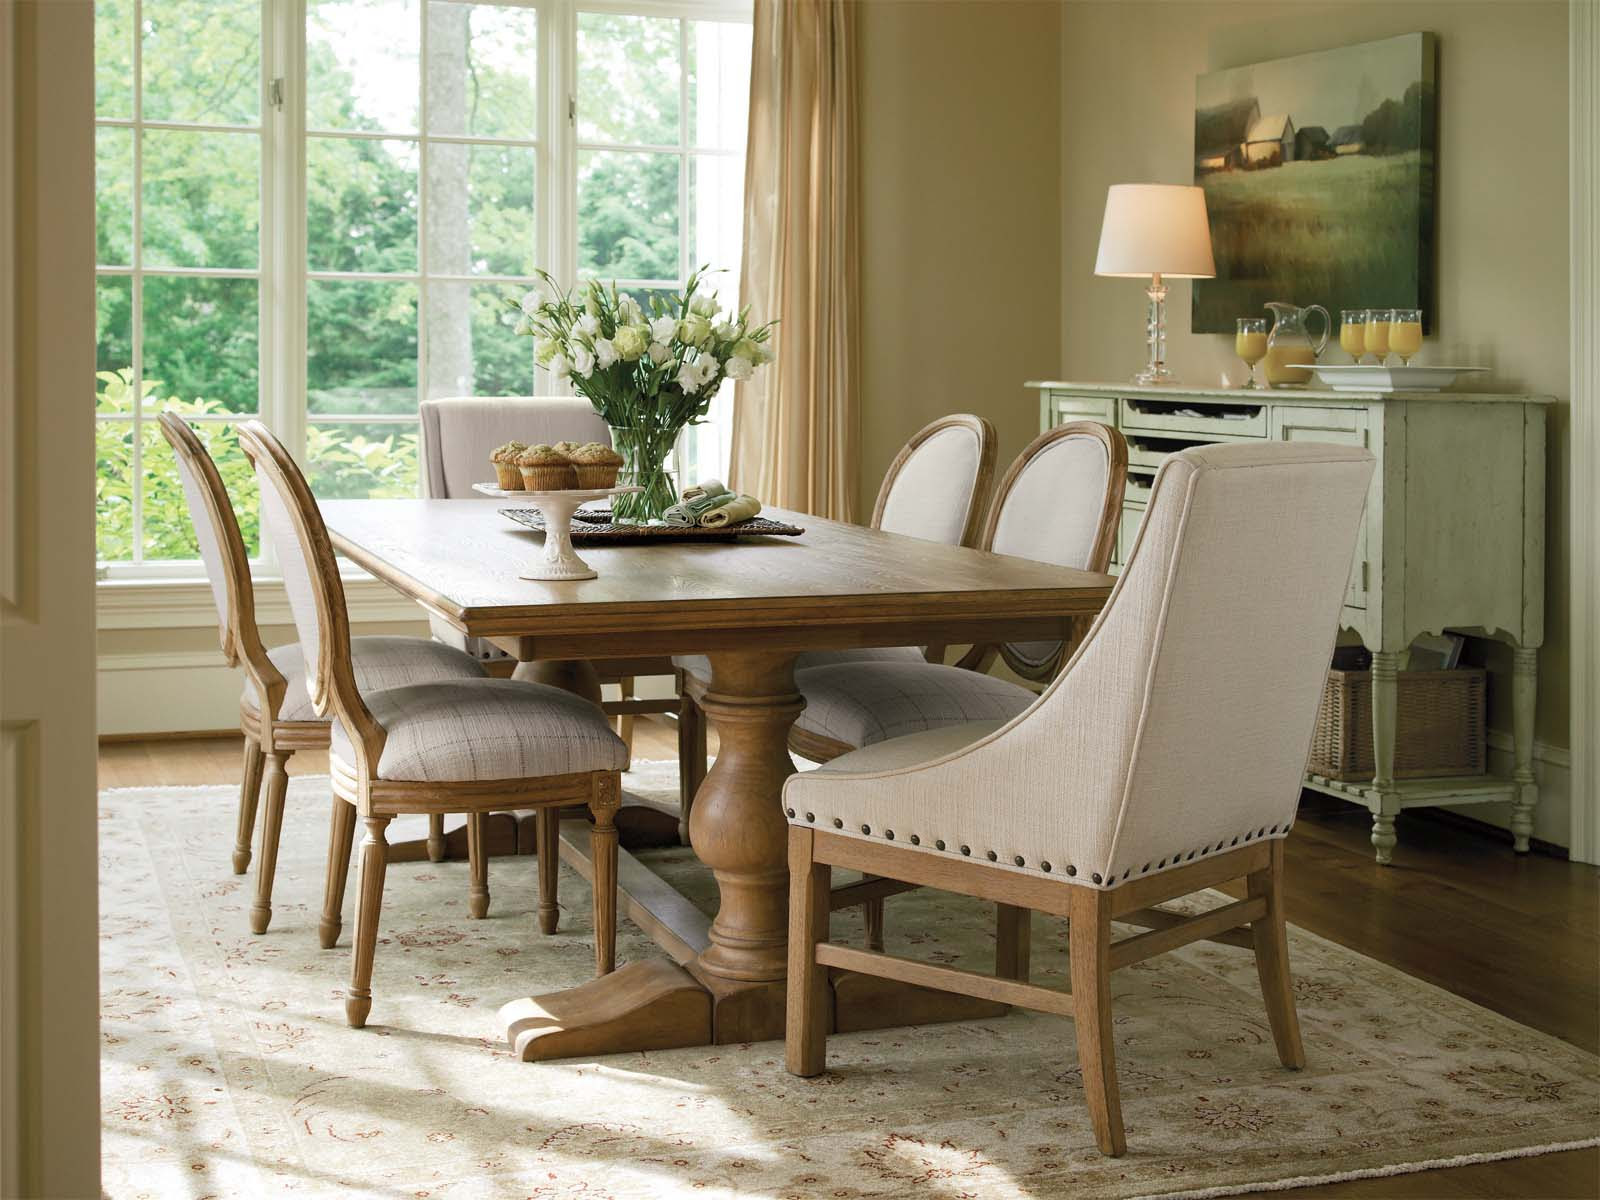 Top Farmhouse Dining Table and Chairs 1600 x 1200 · 185 kB · jpeg